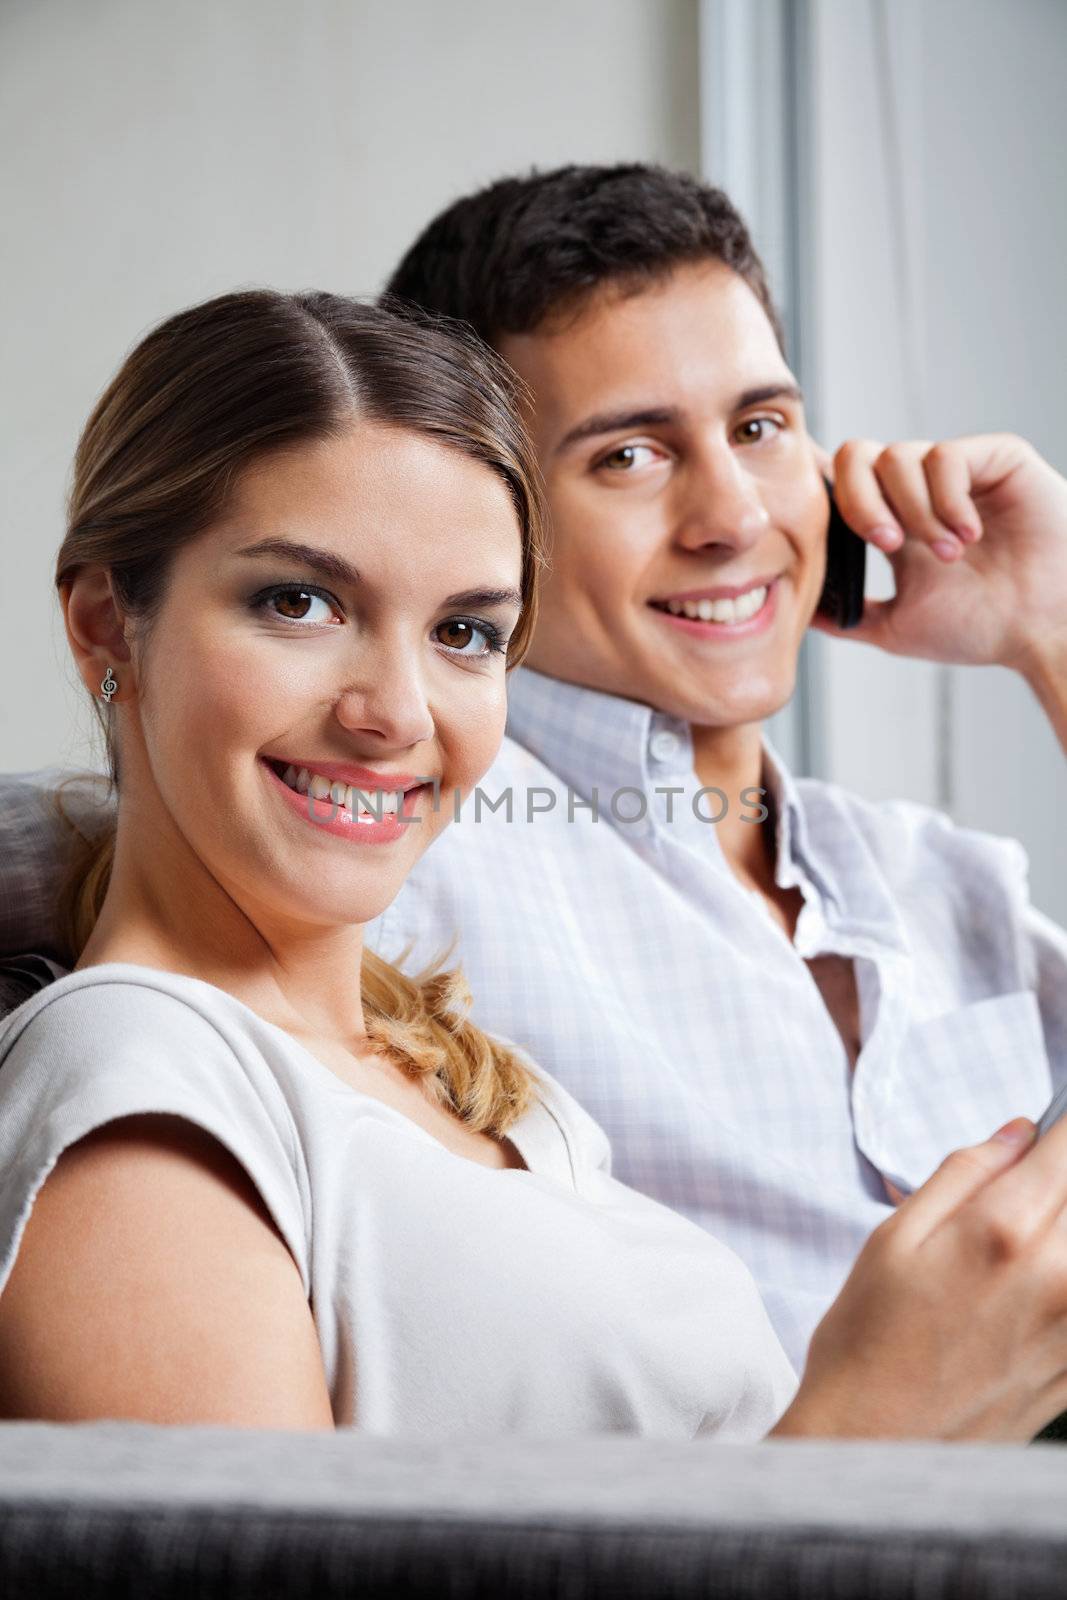 Portrait of beautiful young woman smiling with man on phone call